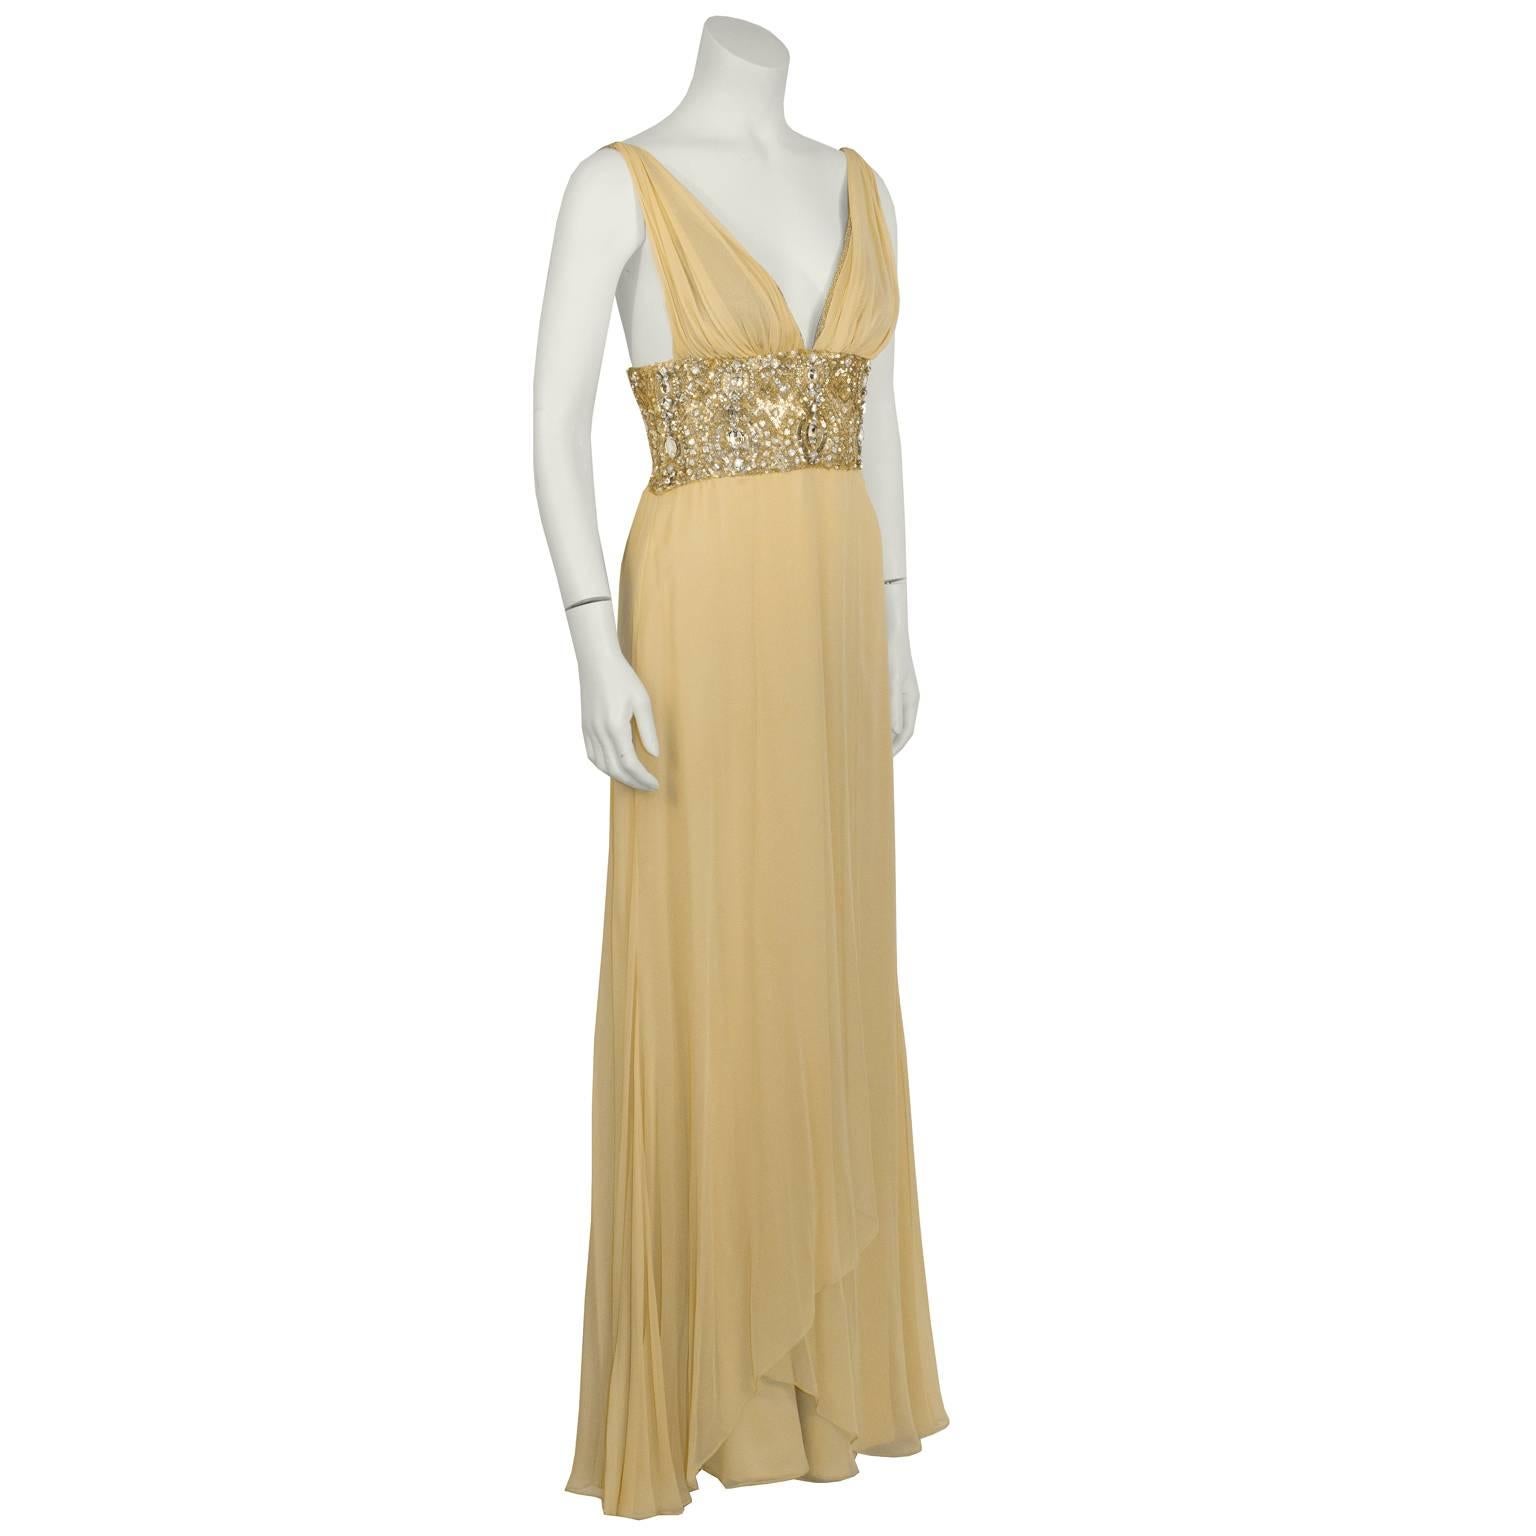 Elegant American couture designer Randhi Rahm  gown from 2009. Butter cream chiffon dress features v-neck with a gathered chiffon layer over bra shape cups, and a gorgeous bodice encrusted with gold and silver sequins and beads. Side zip closure.